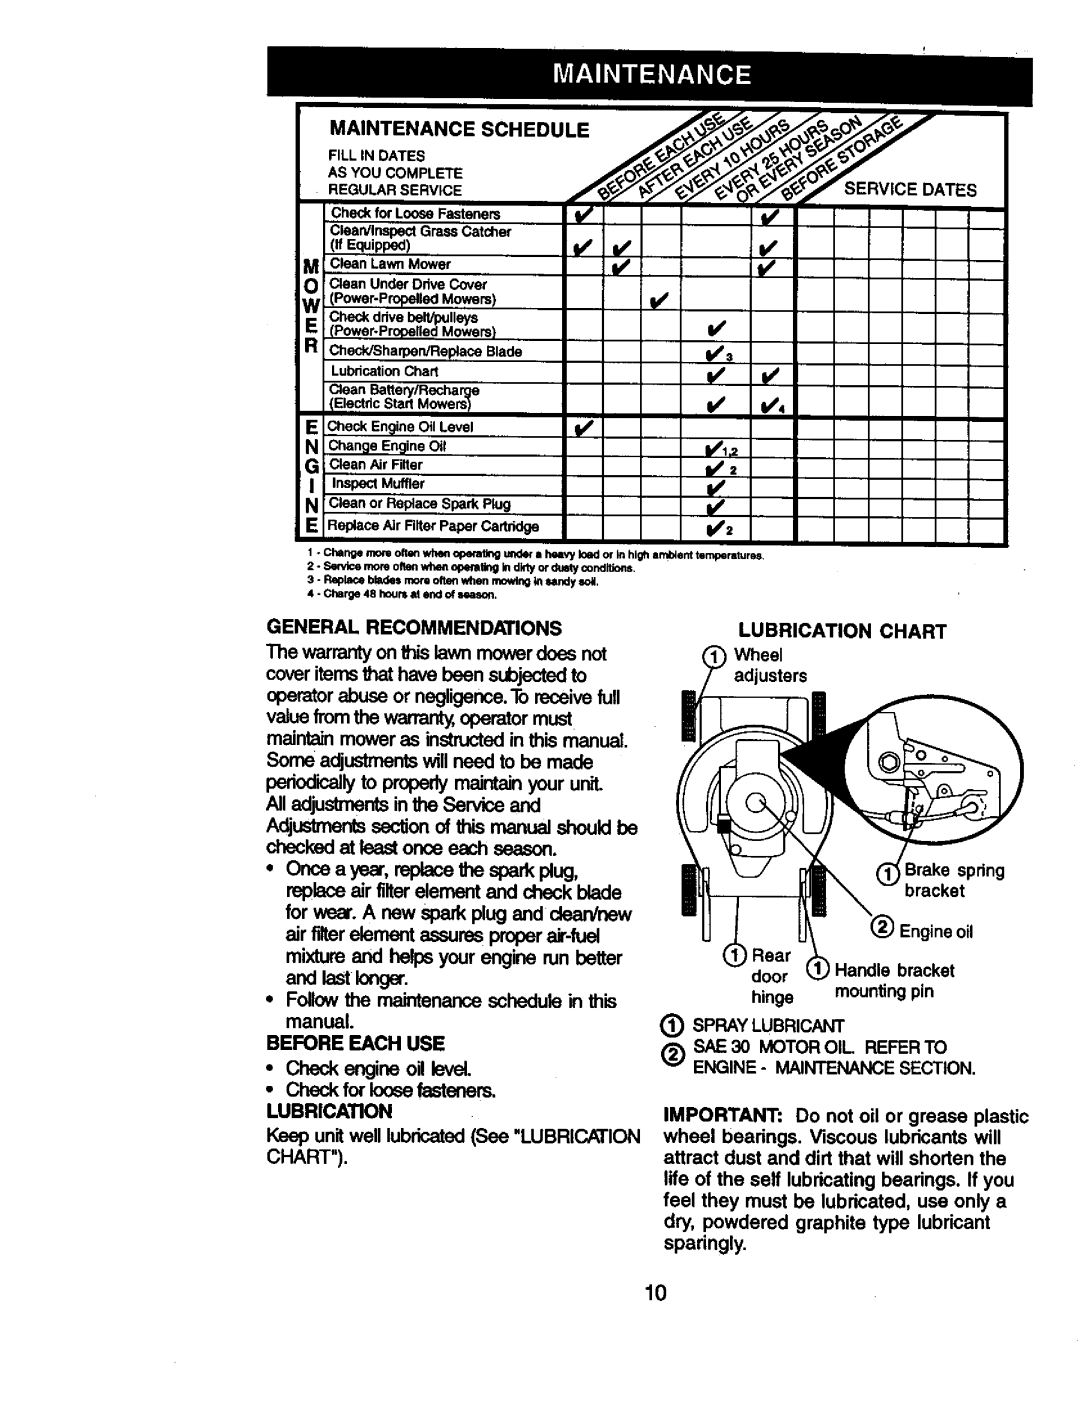 Craftsman 917.38836 owner manual aed nger, Ma,N,E,Ancescheoule, intheSew e and, Adjt_Vnentssectionofthismanual ,shouldbe 